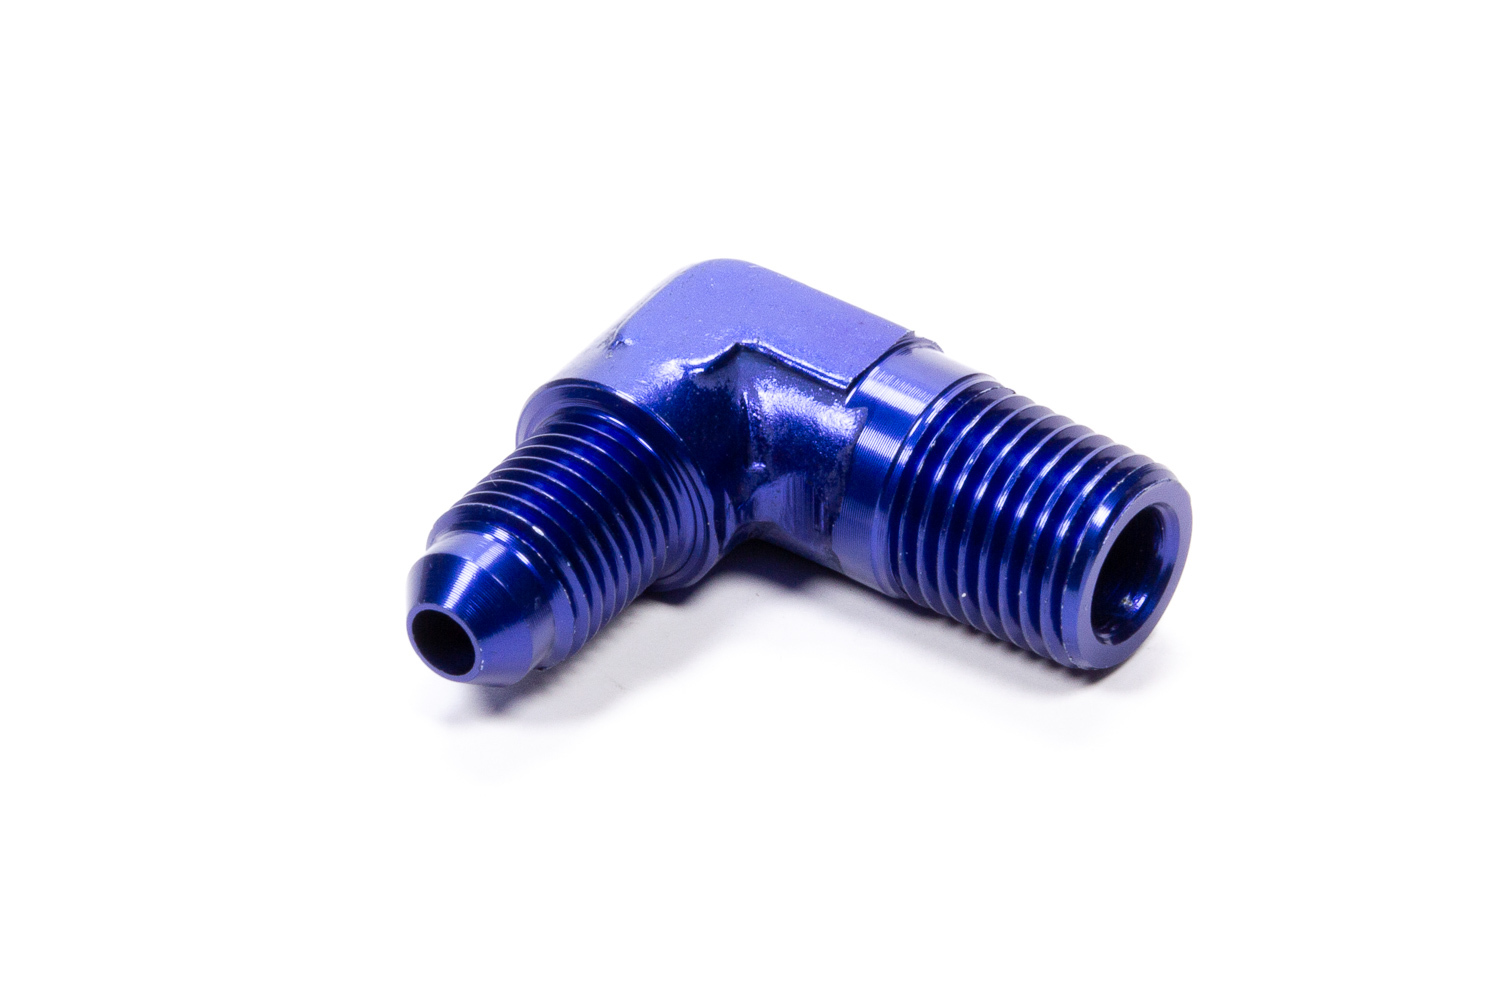 Fragola 482244 - Fitting, Adapter, 90 Degree, 4 AN Male to 1/4 in NPT Male, Aluminum, Blue Anodized, Each